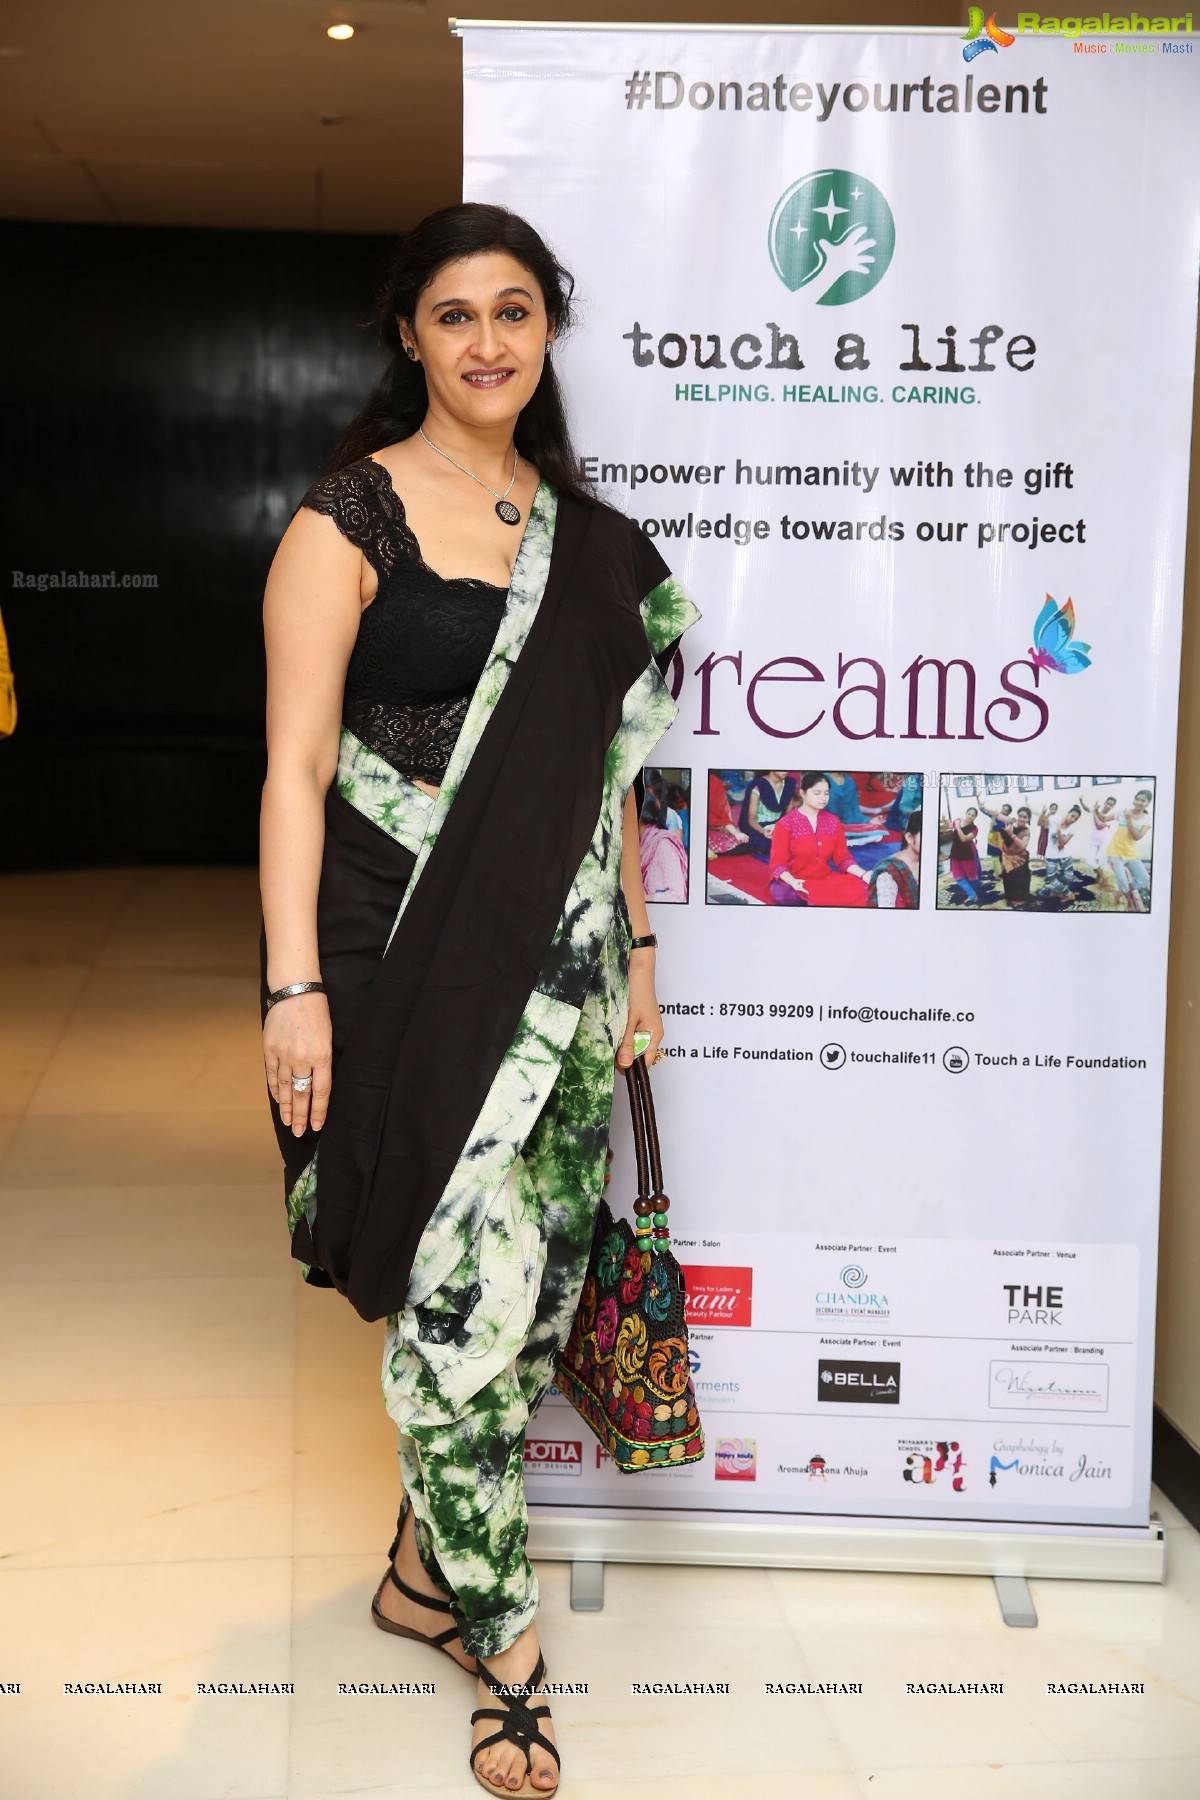 Grand Unveiling Of Summer Workshop ‘The Dream’ By Touch A Life Foundation